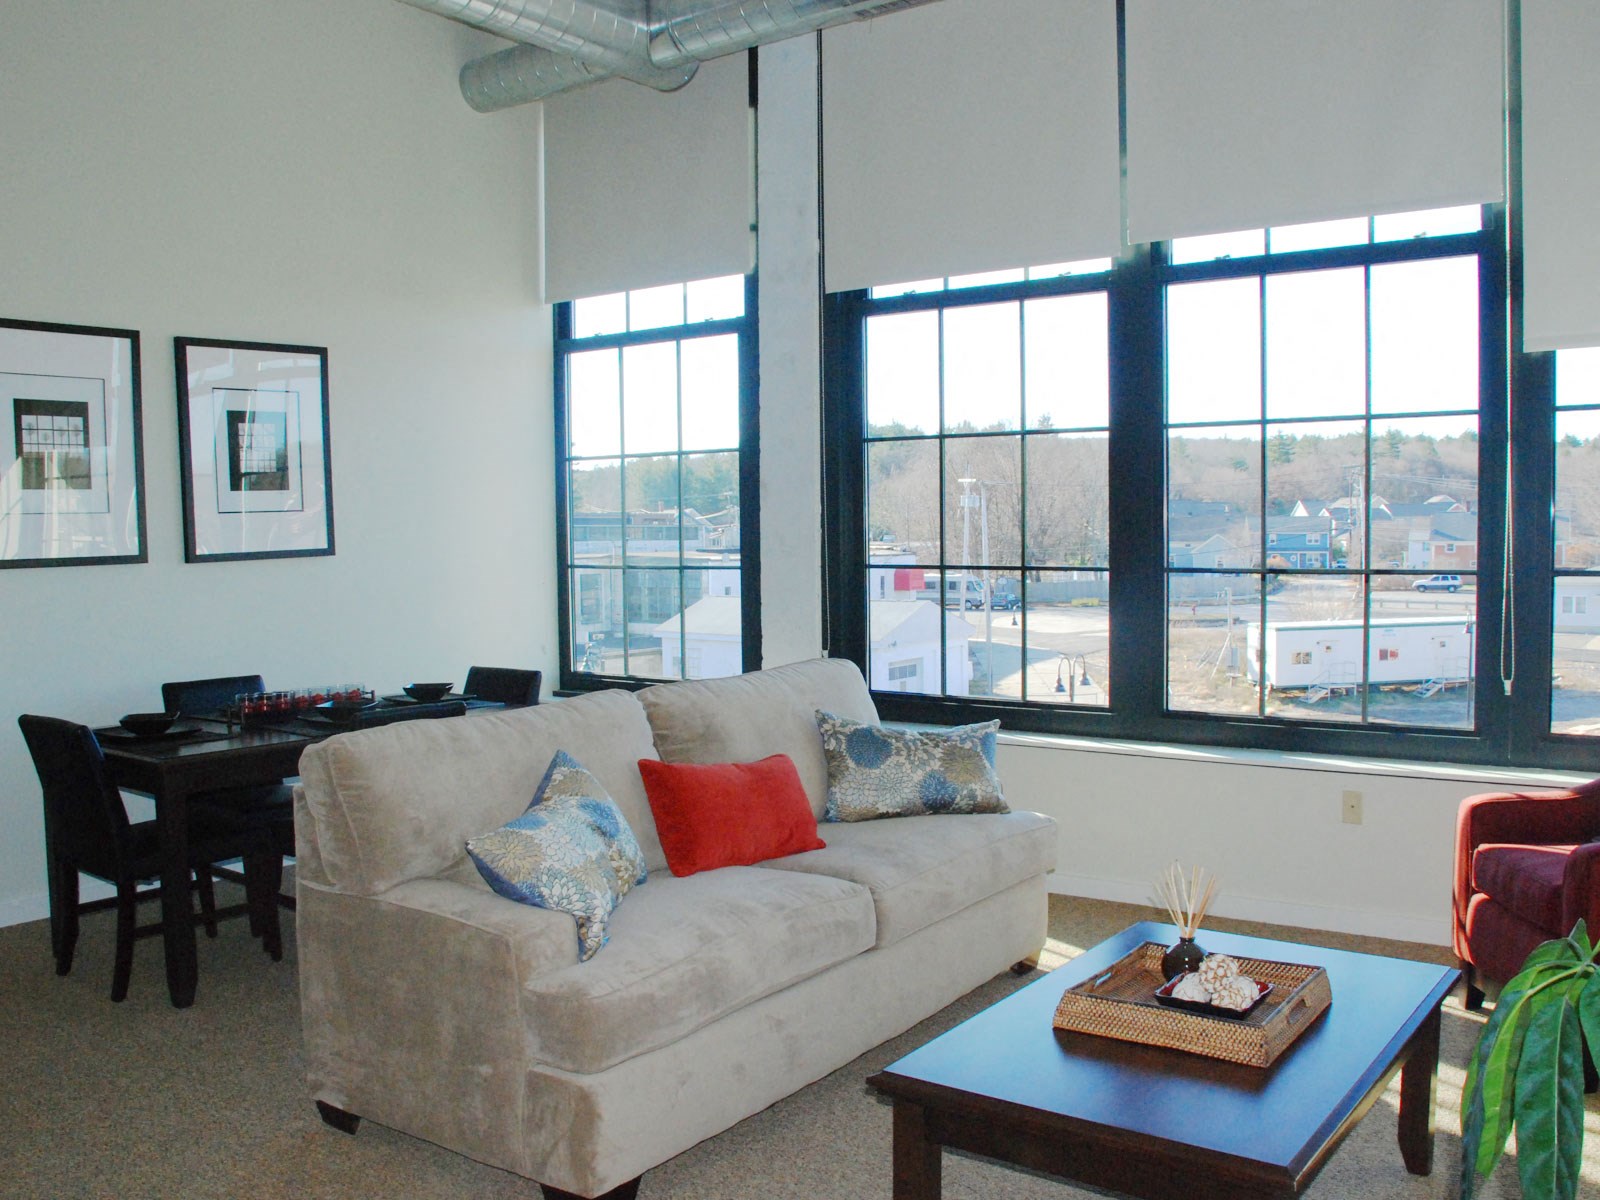 Furnished apartment interior featuring huge windows and lots of light